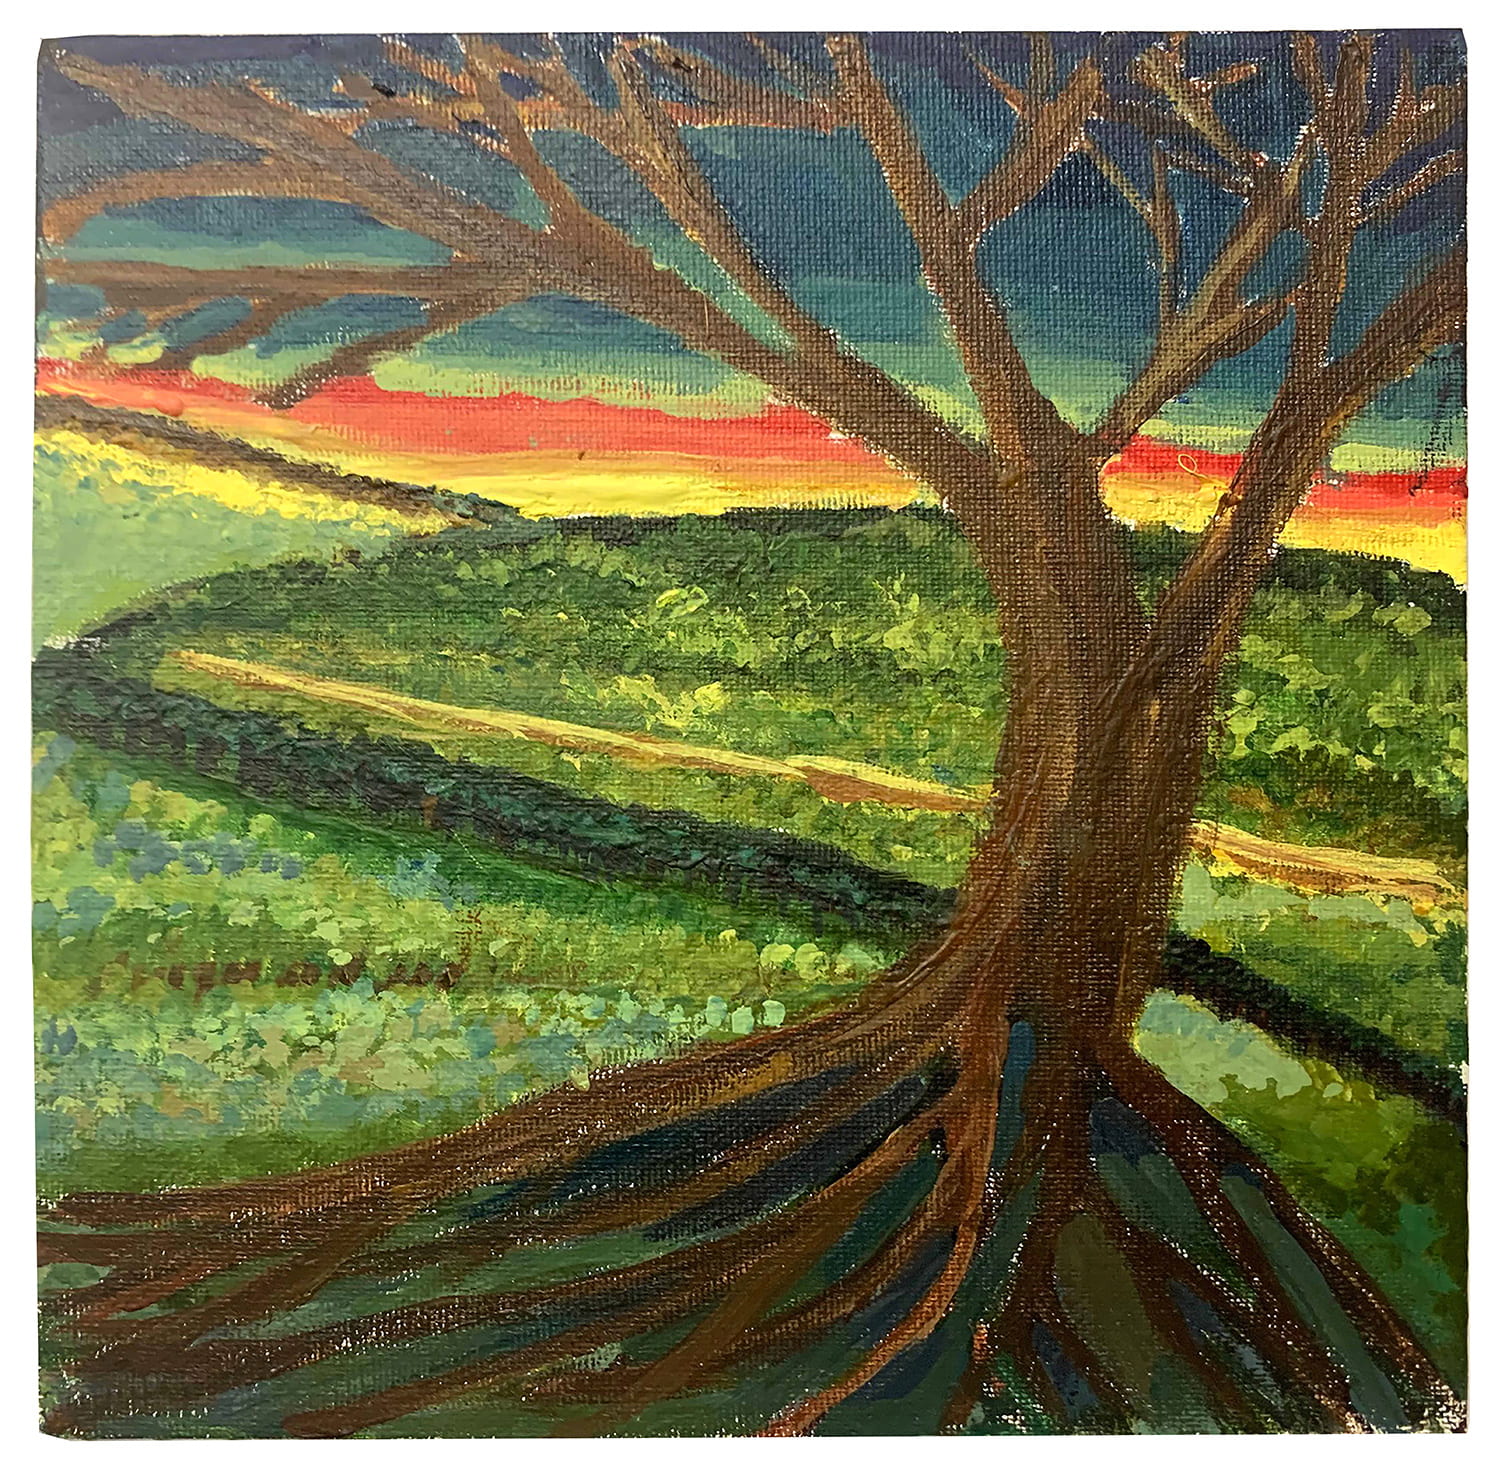 Painting of a leafless tree in a field at dusk